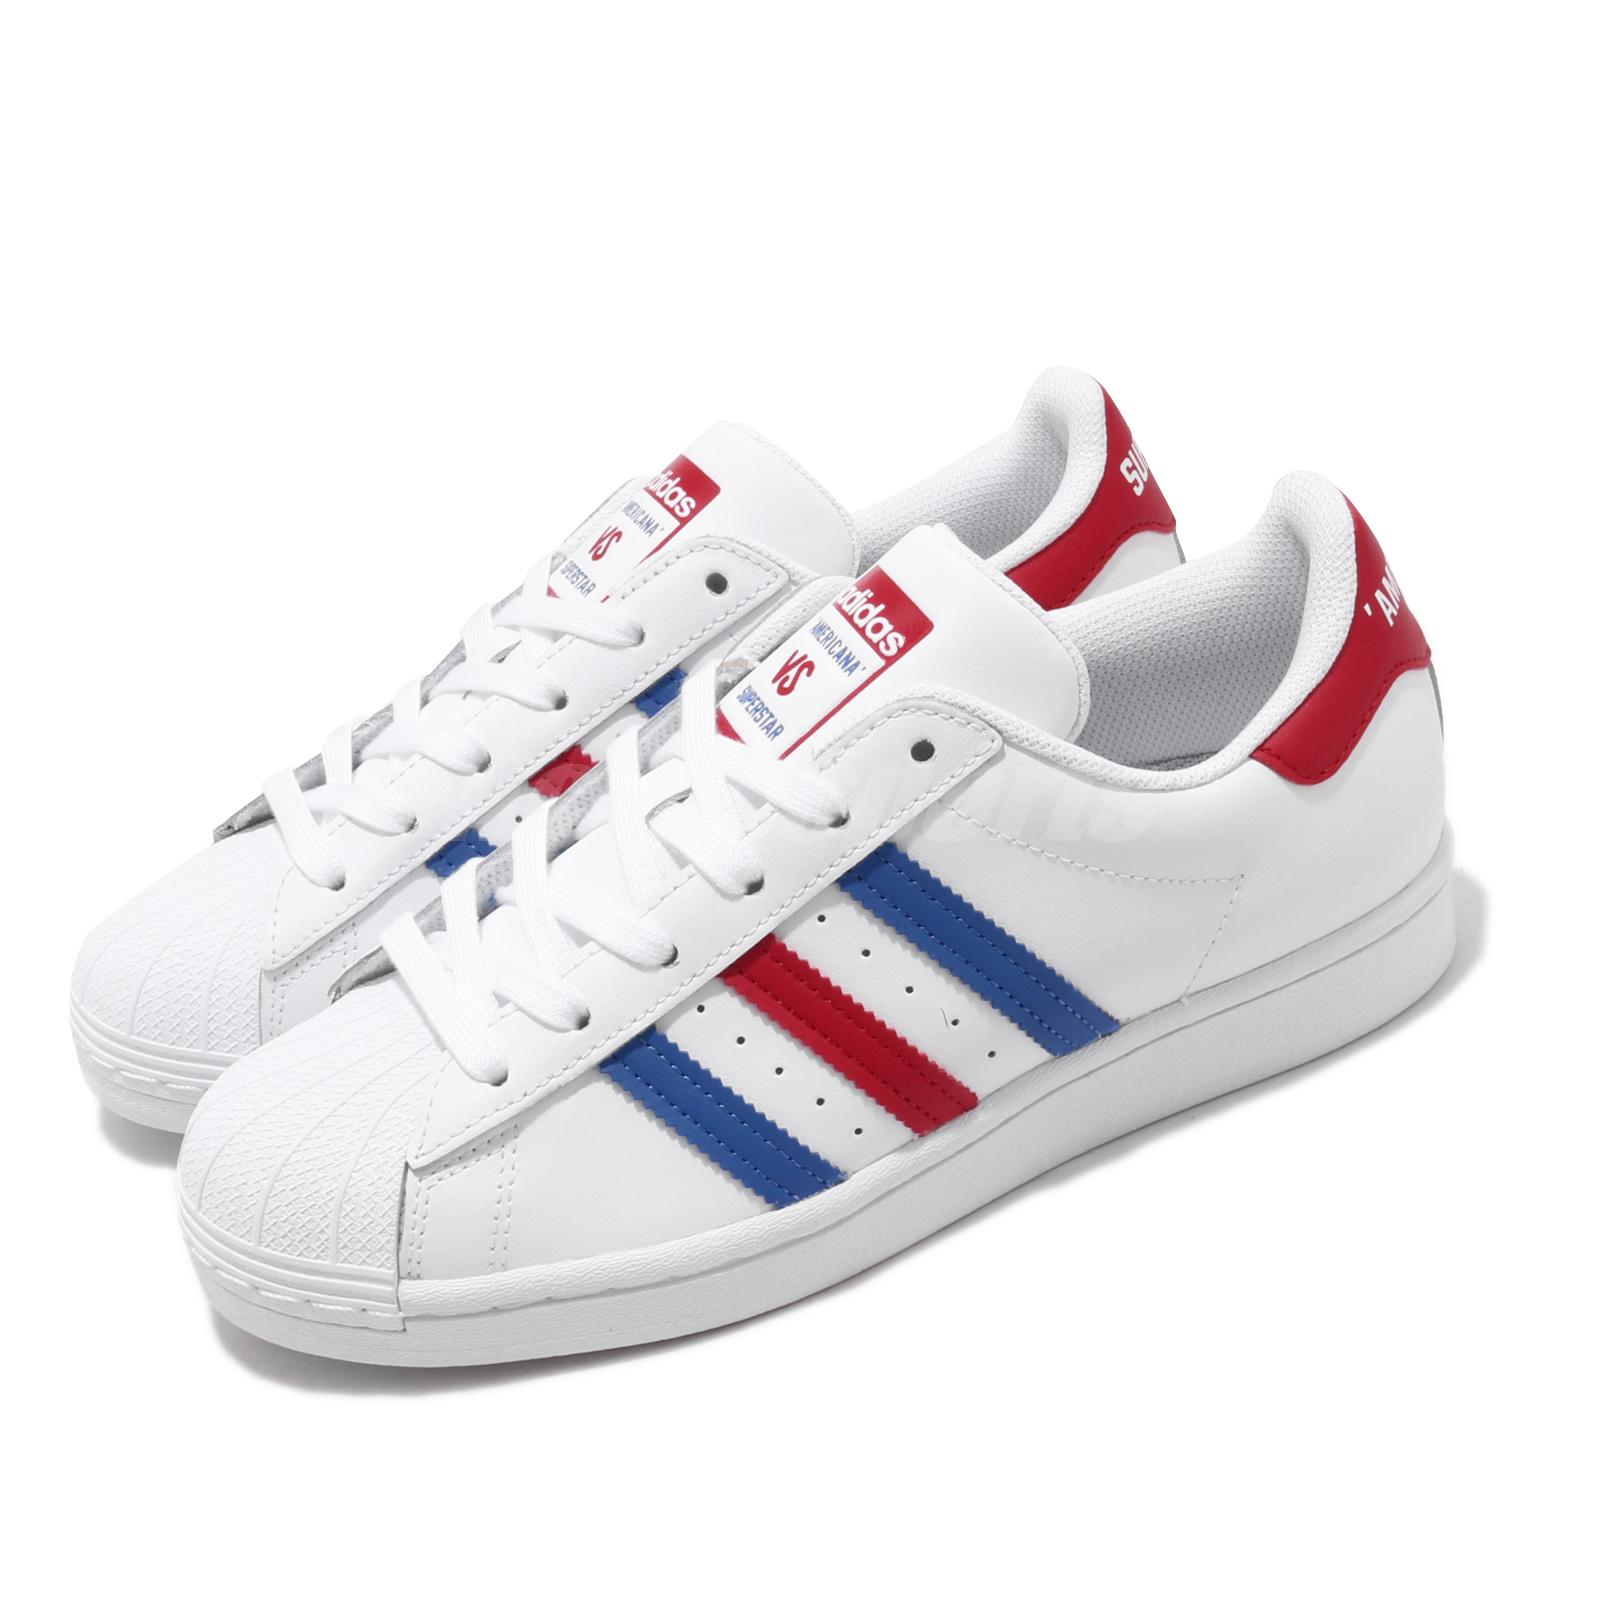 adidas superstar available